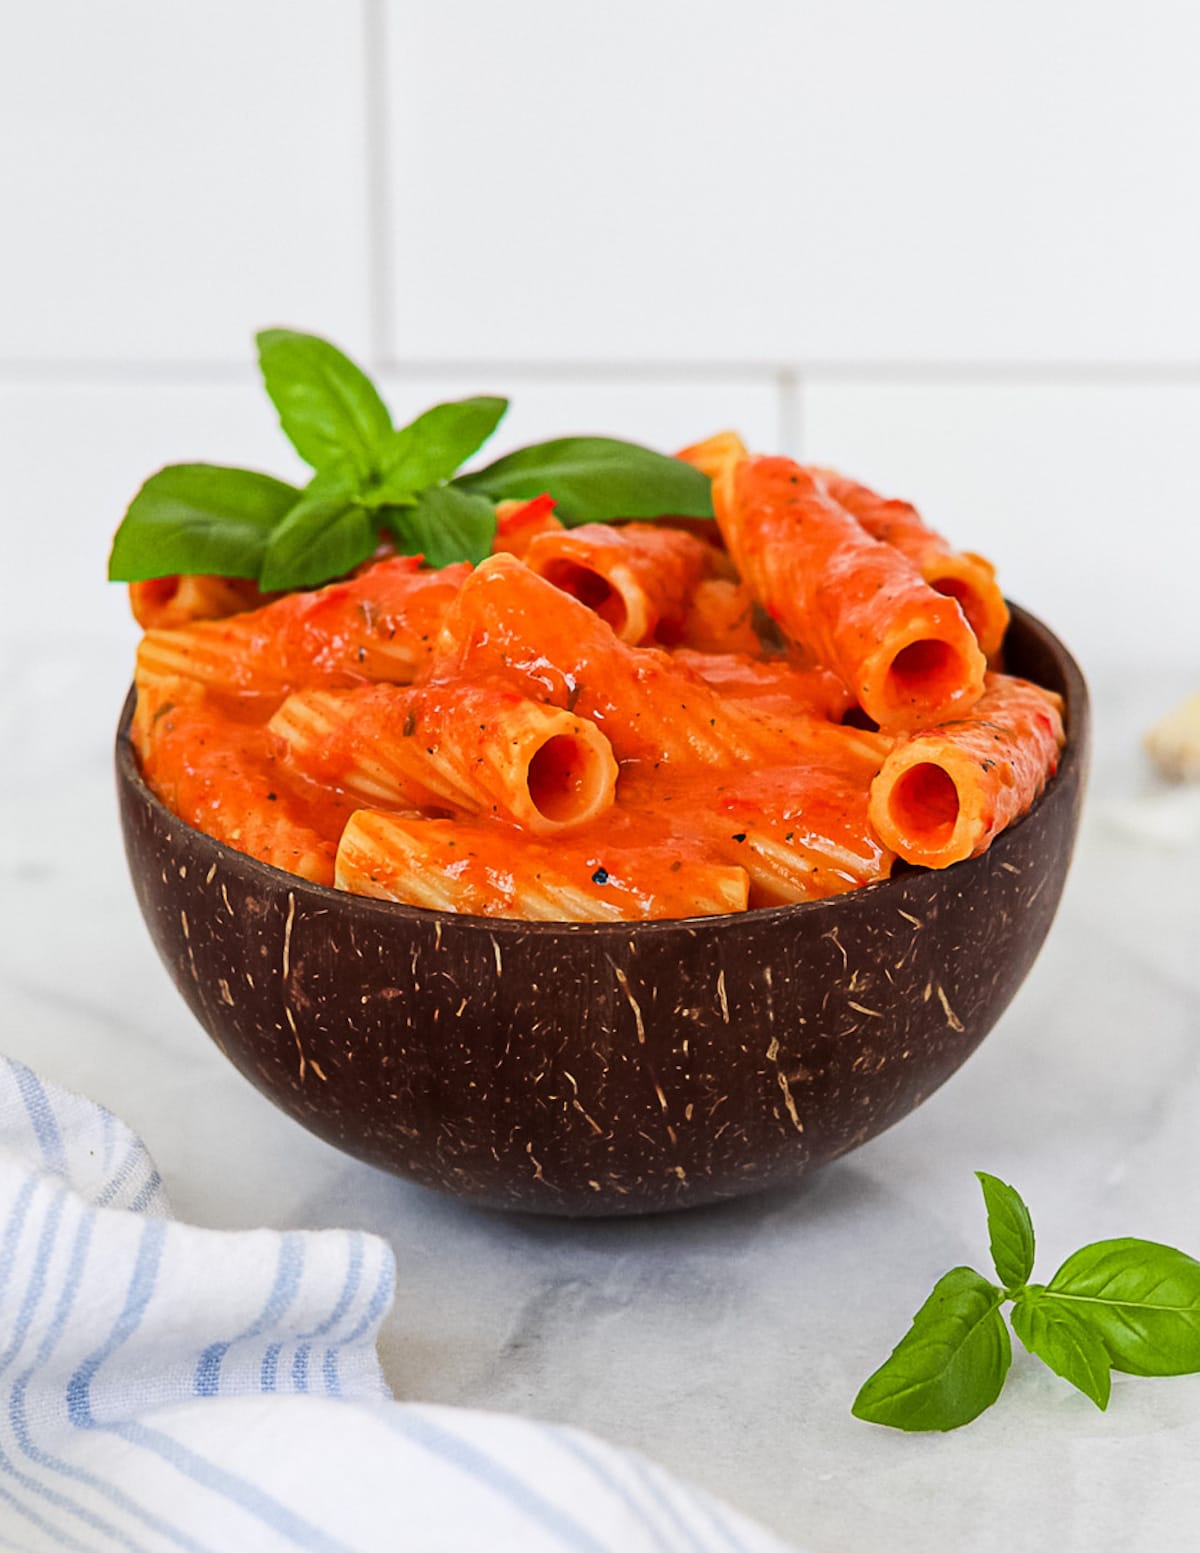 A side angle picture of noodles covered in a red pasta sauce.